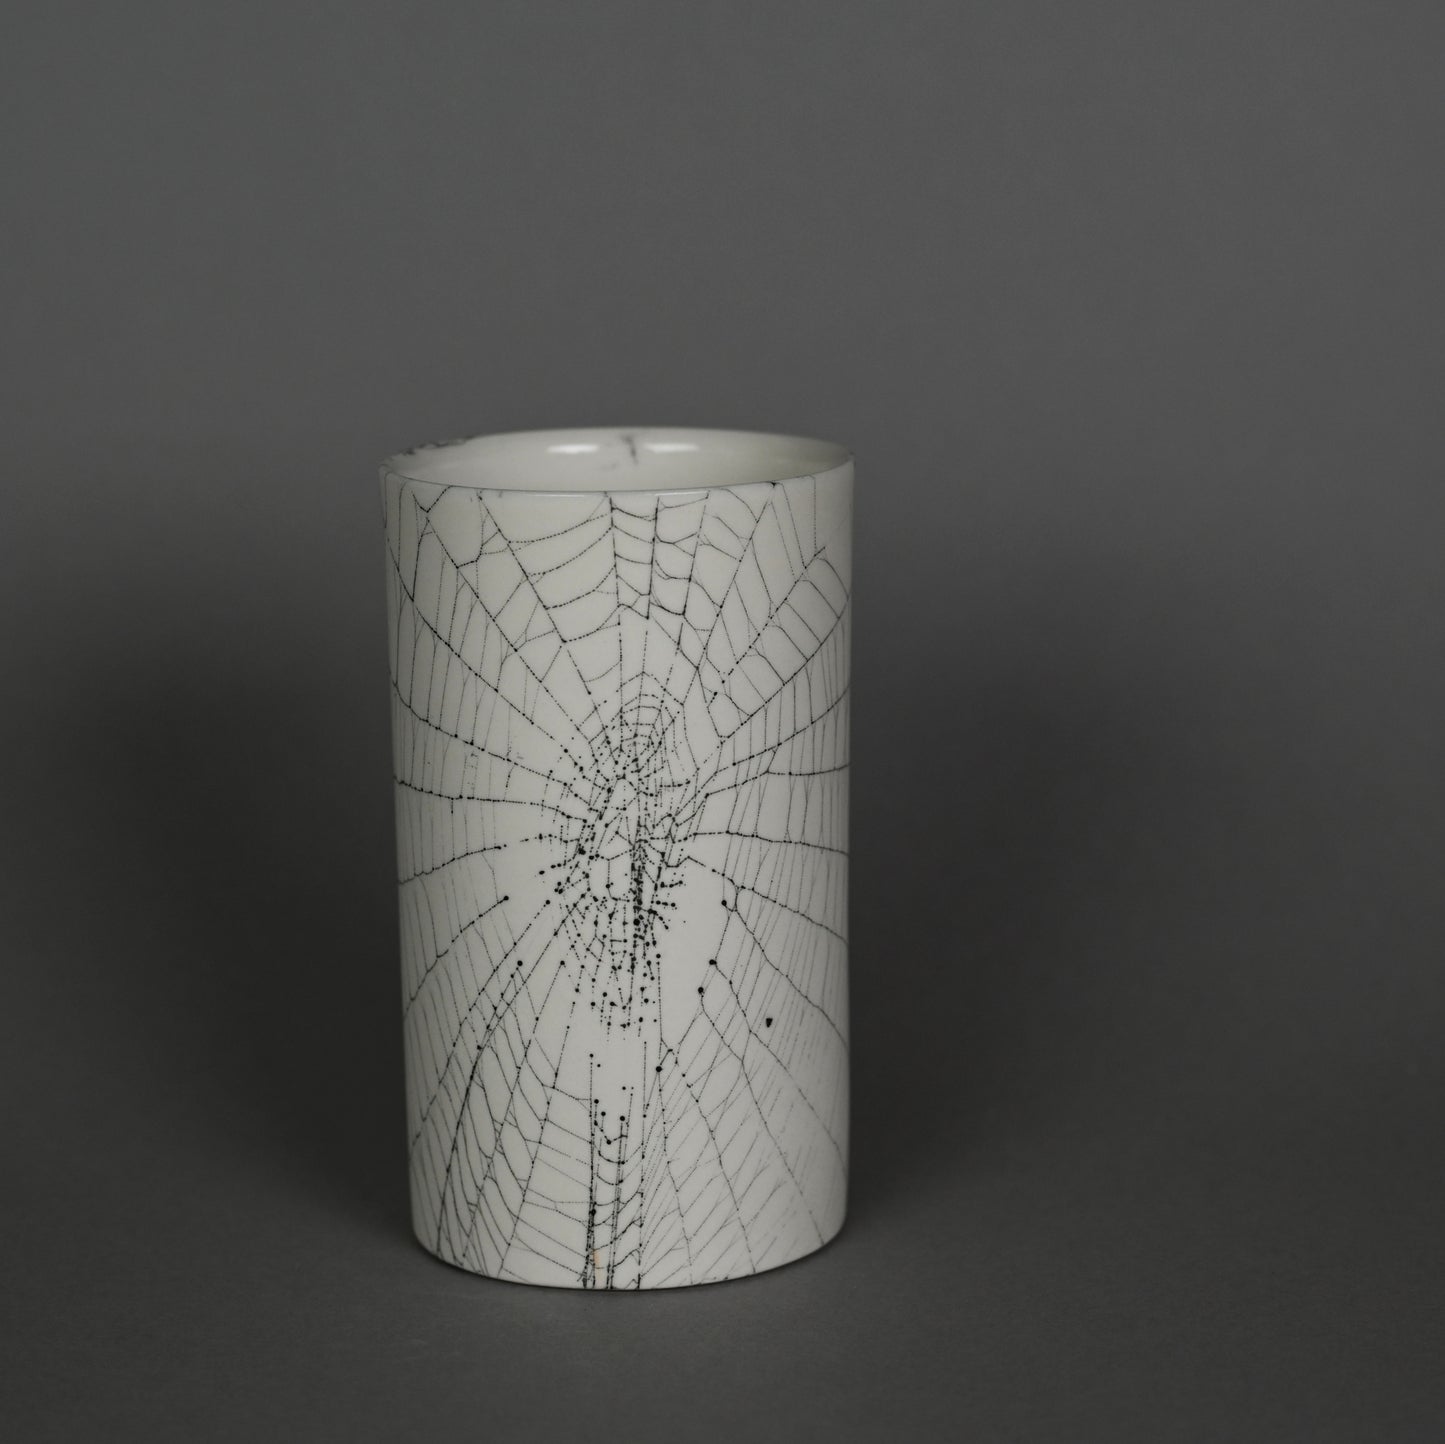 Web on Clay (203), Collected September 25, 2022